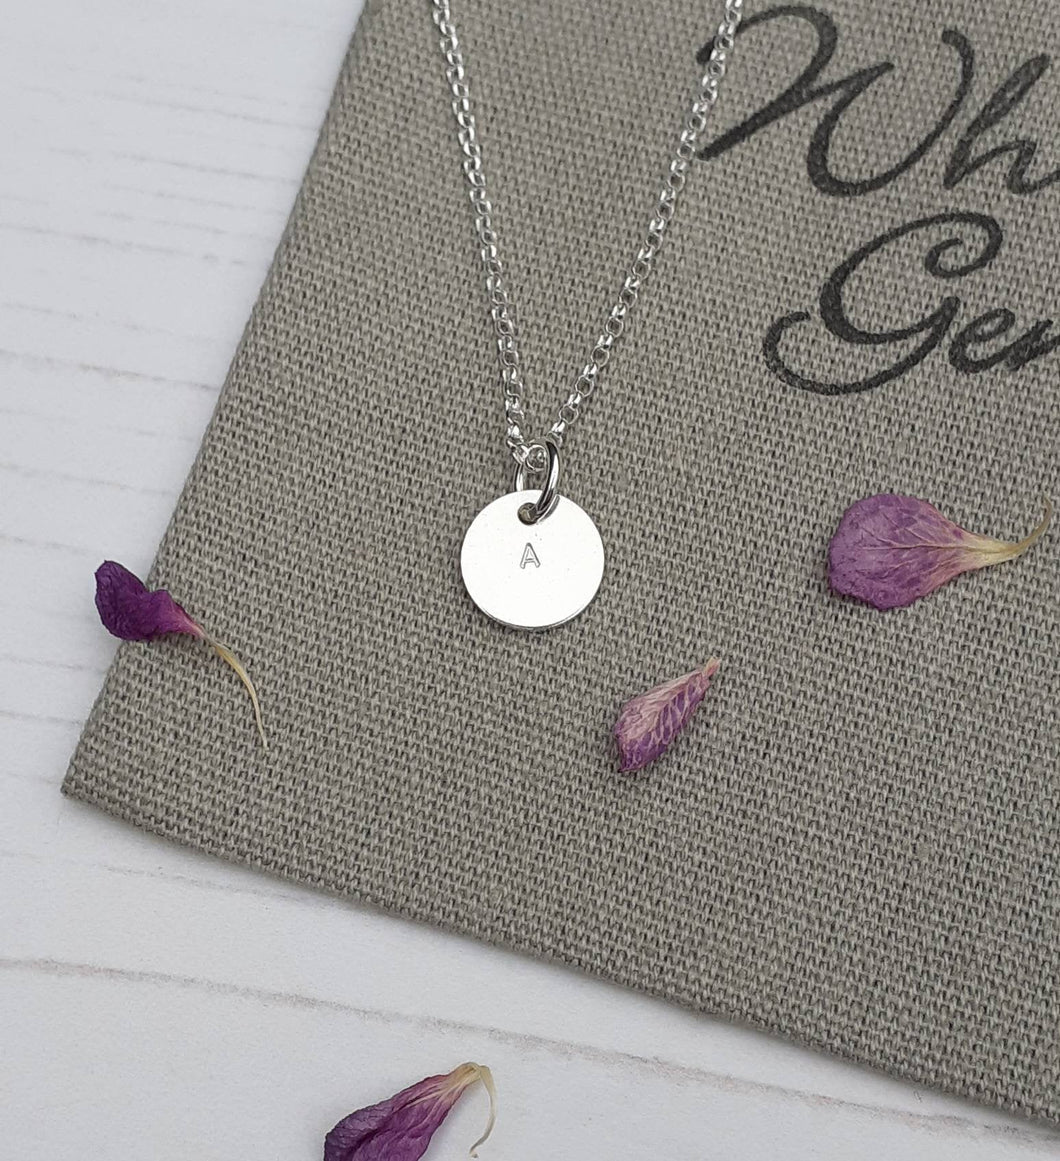 Silver Initial Necklace,Initial Disc,Silver Disc Necklace,Personalized Jewellery,Silver Necklace